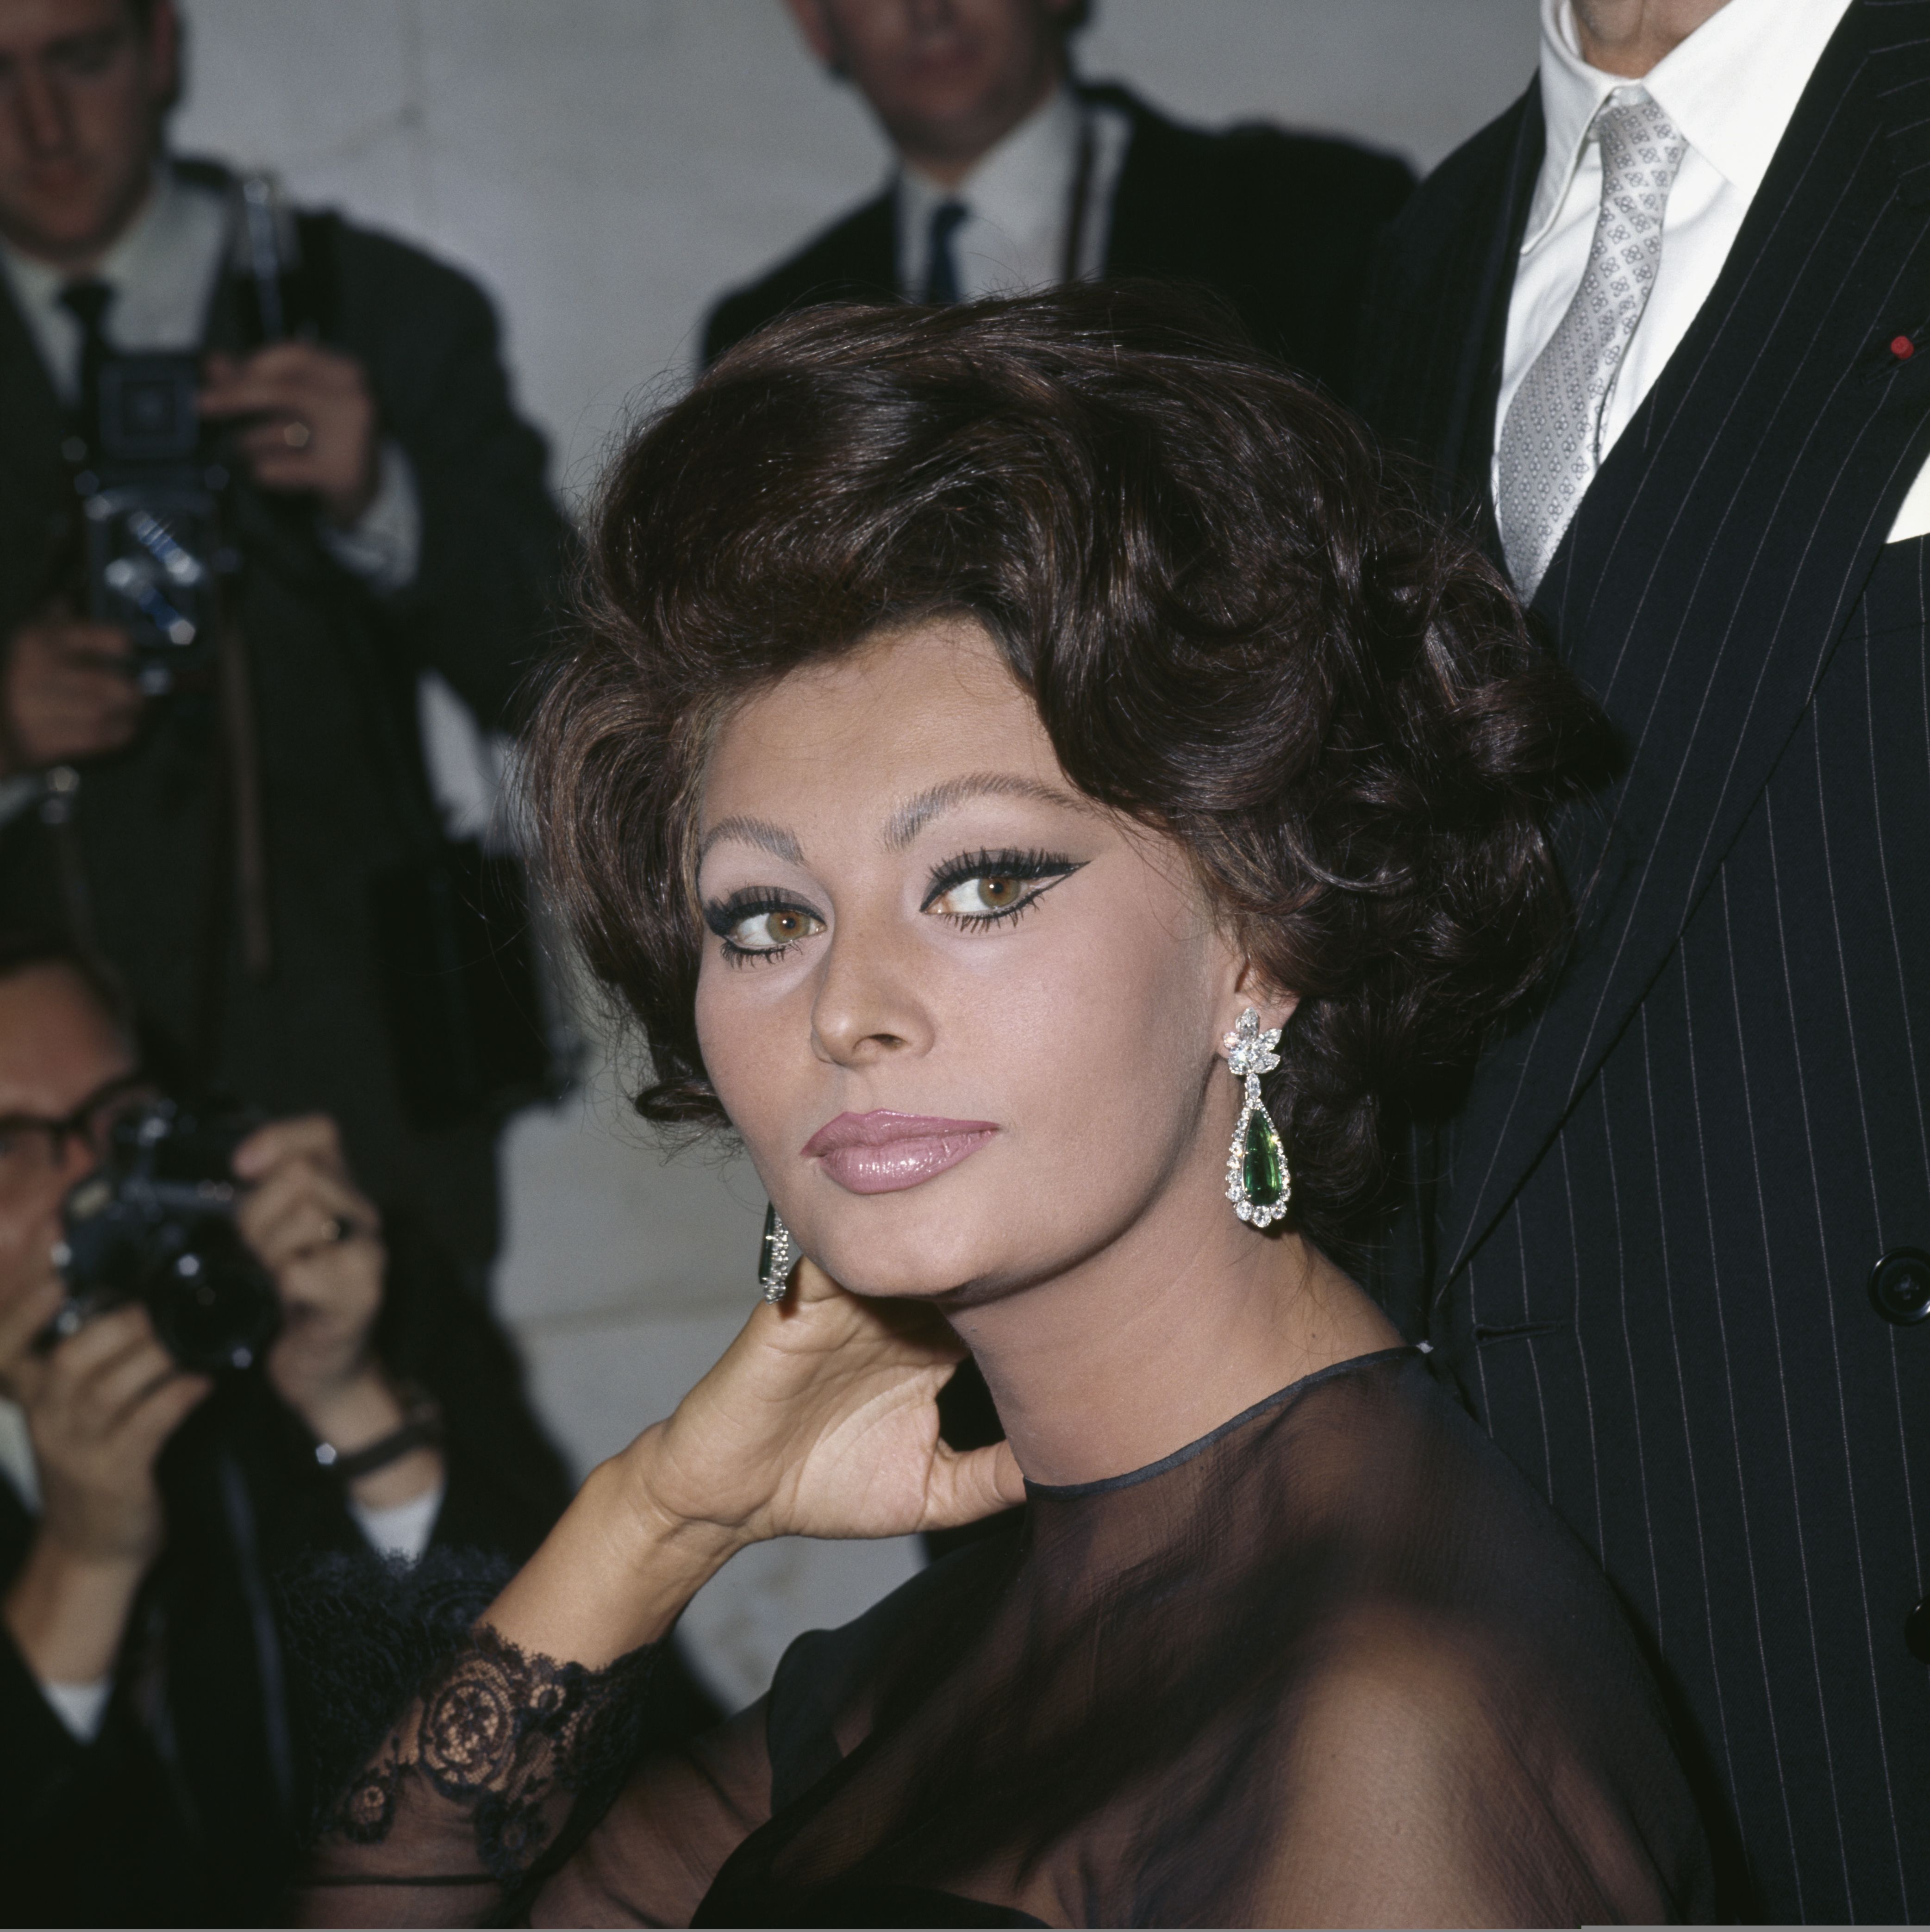 Sophia Loren poses for photographers at the Savoy Hotel, London in 1965. | Photo: Getty Images